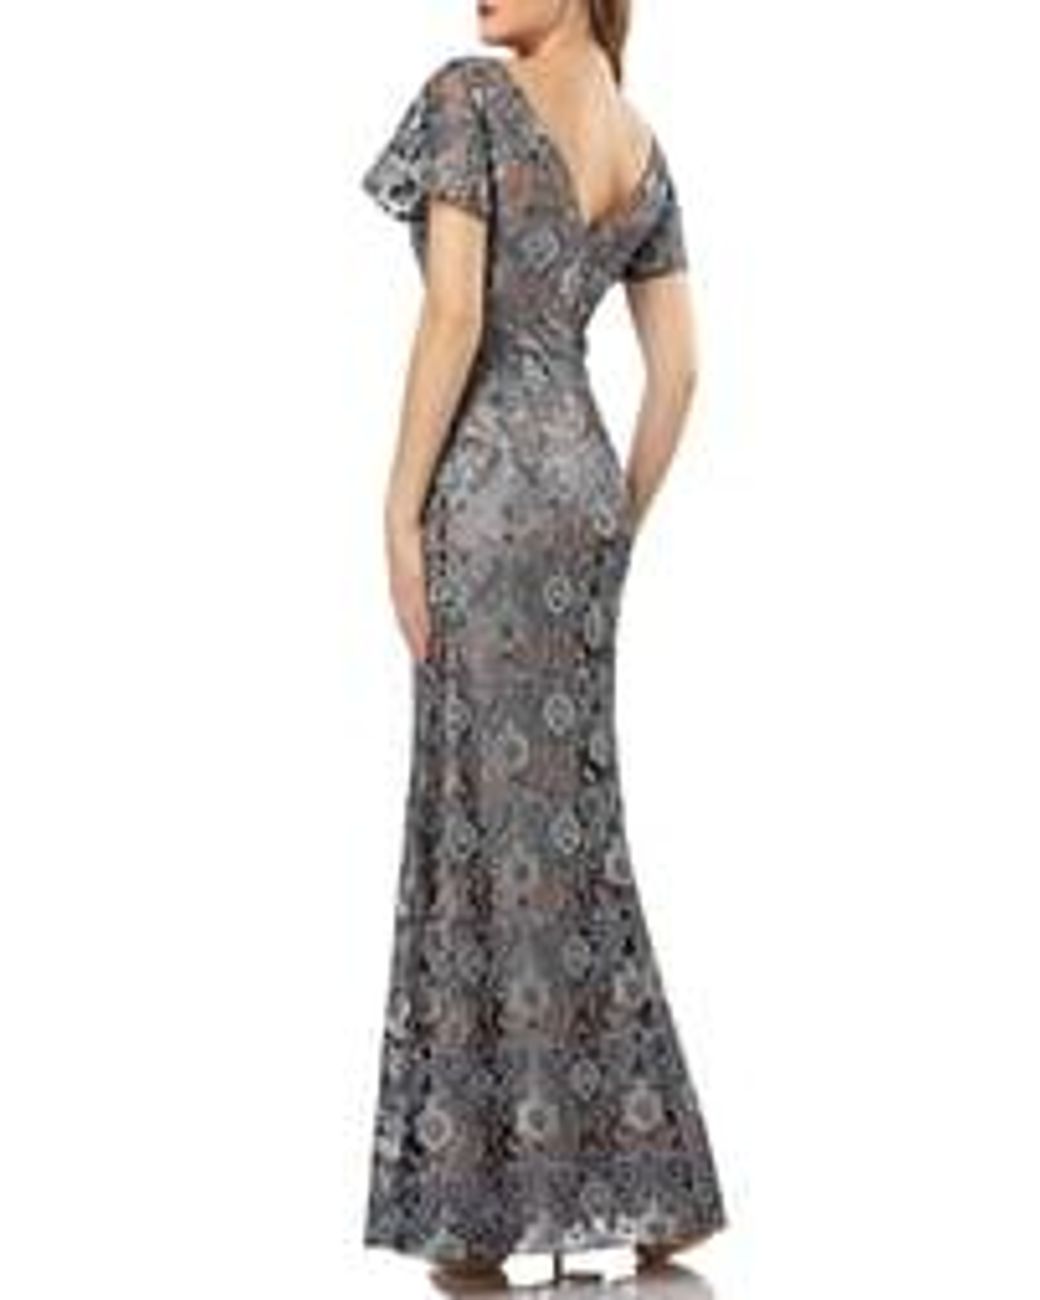 js collections lace peplum gown